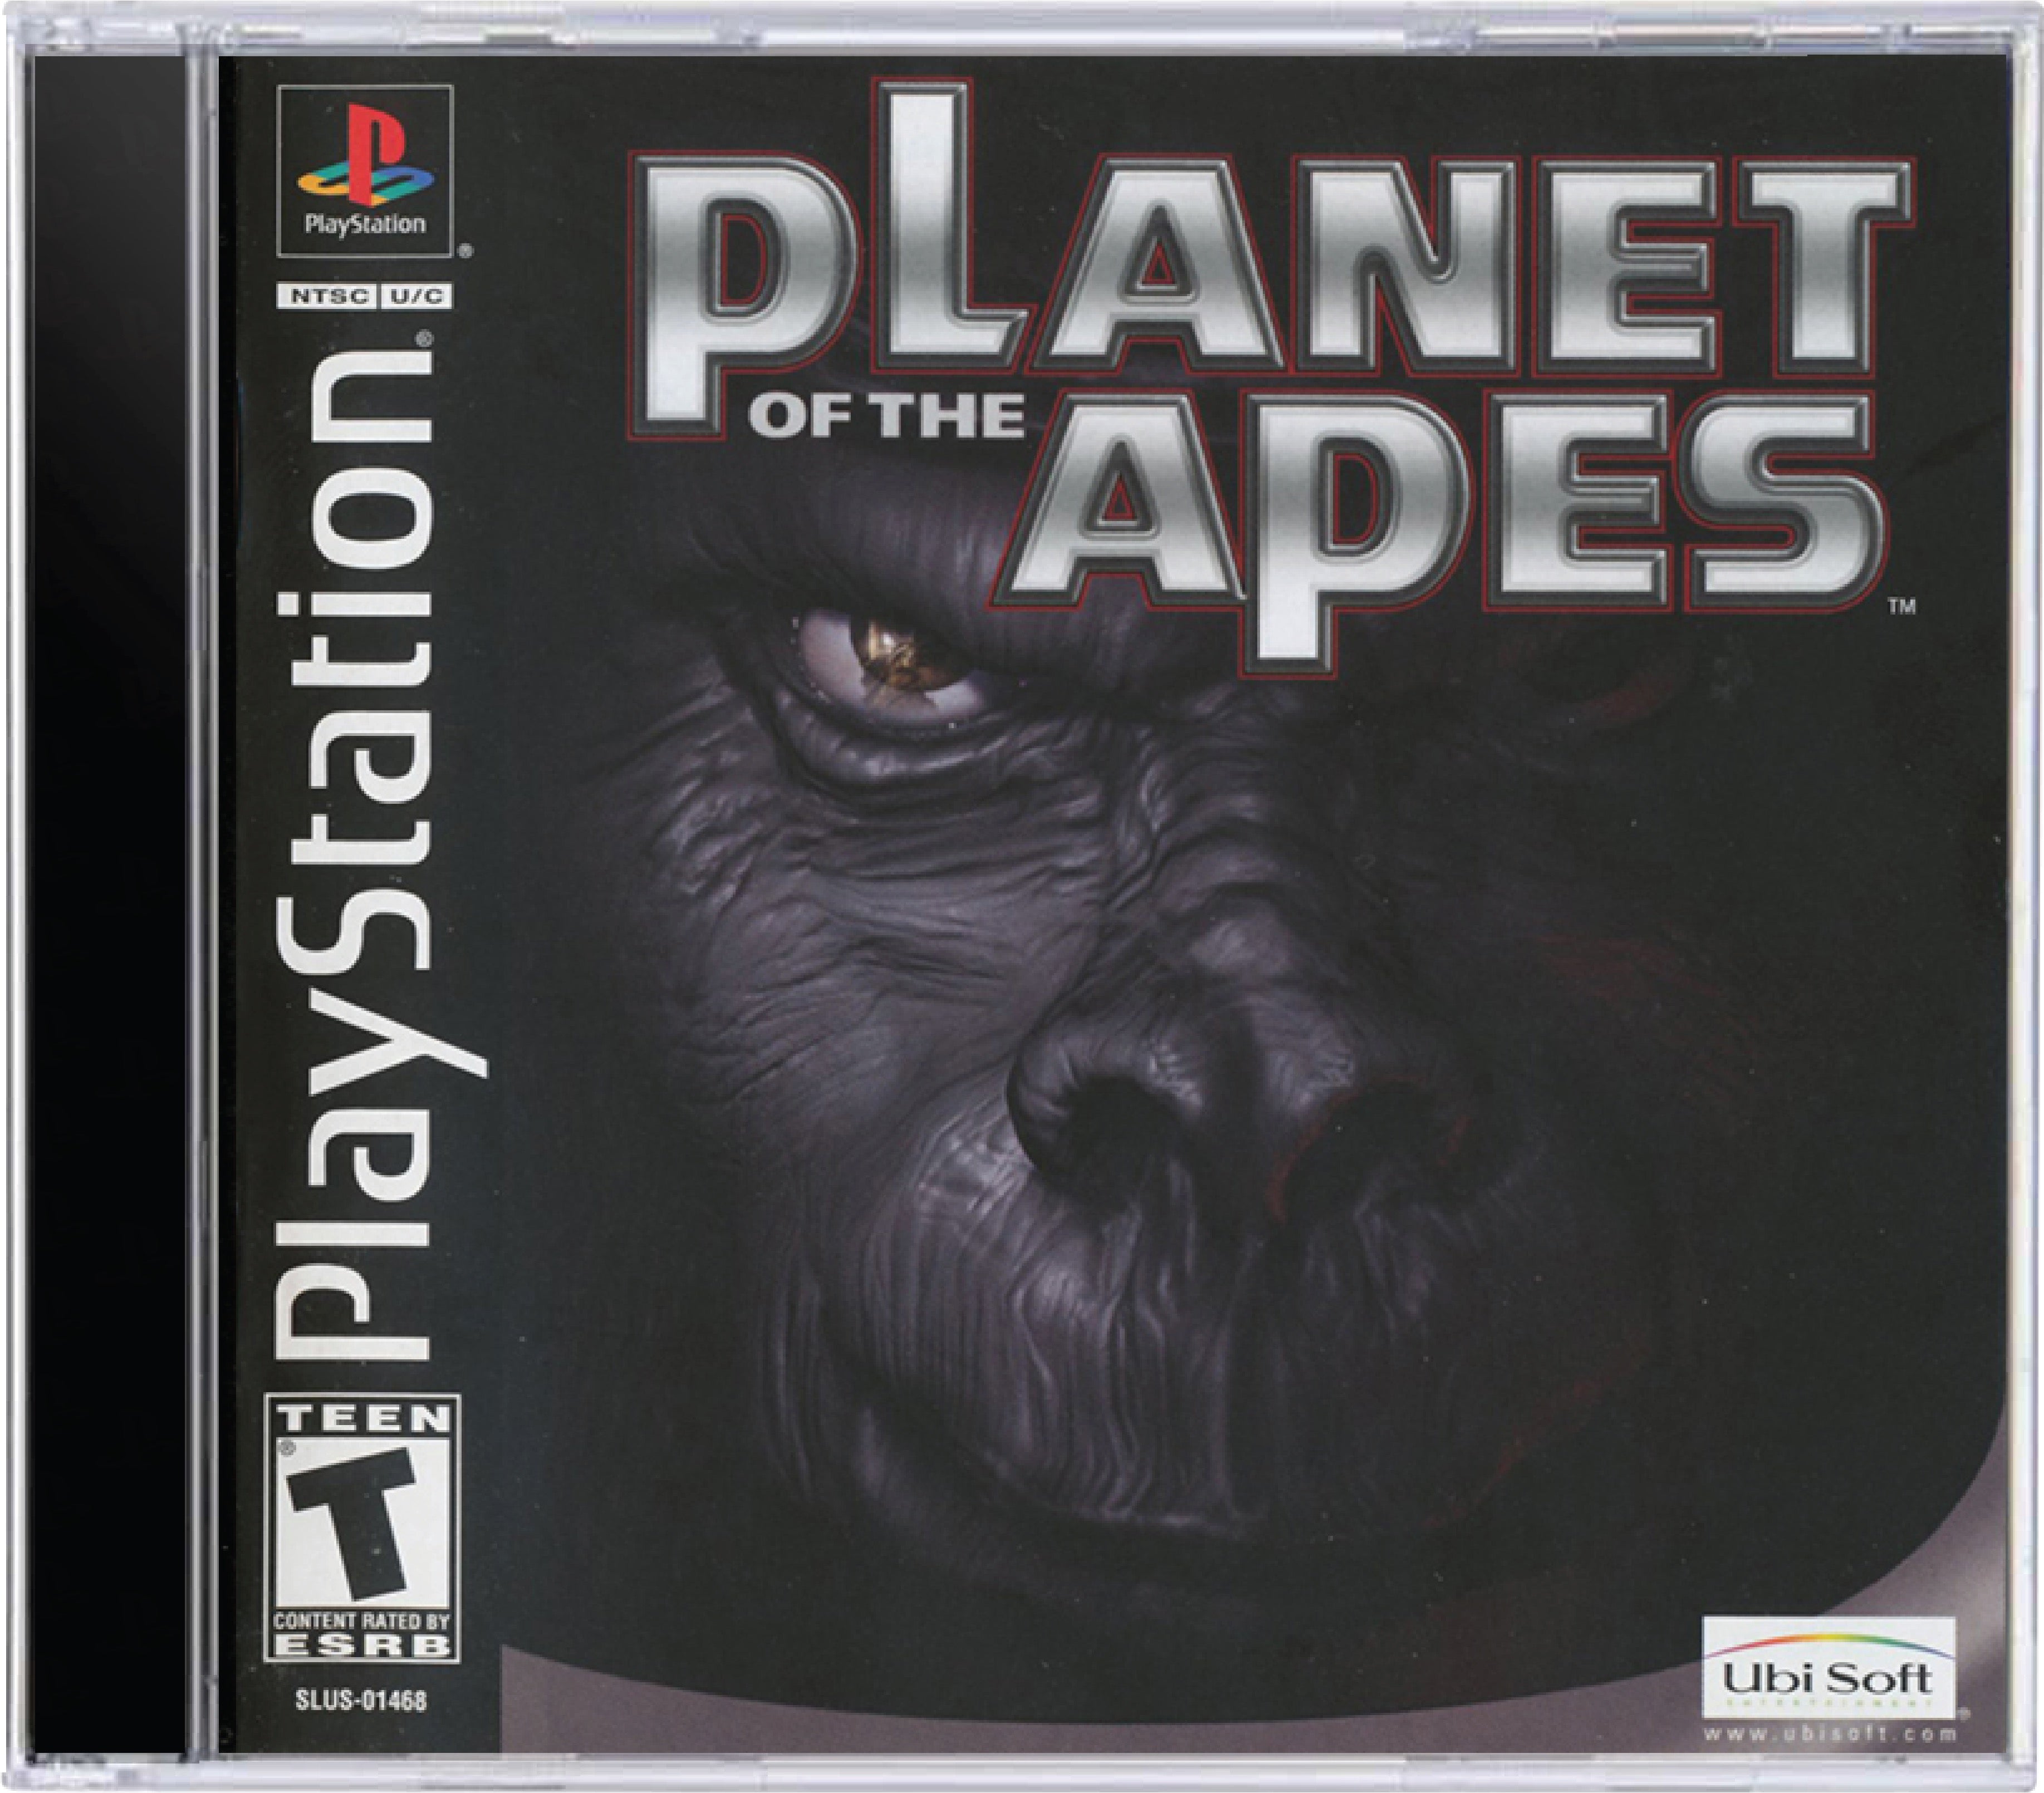 Planet of the Apes Cover Art and Product Photo